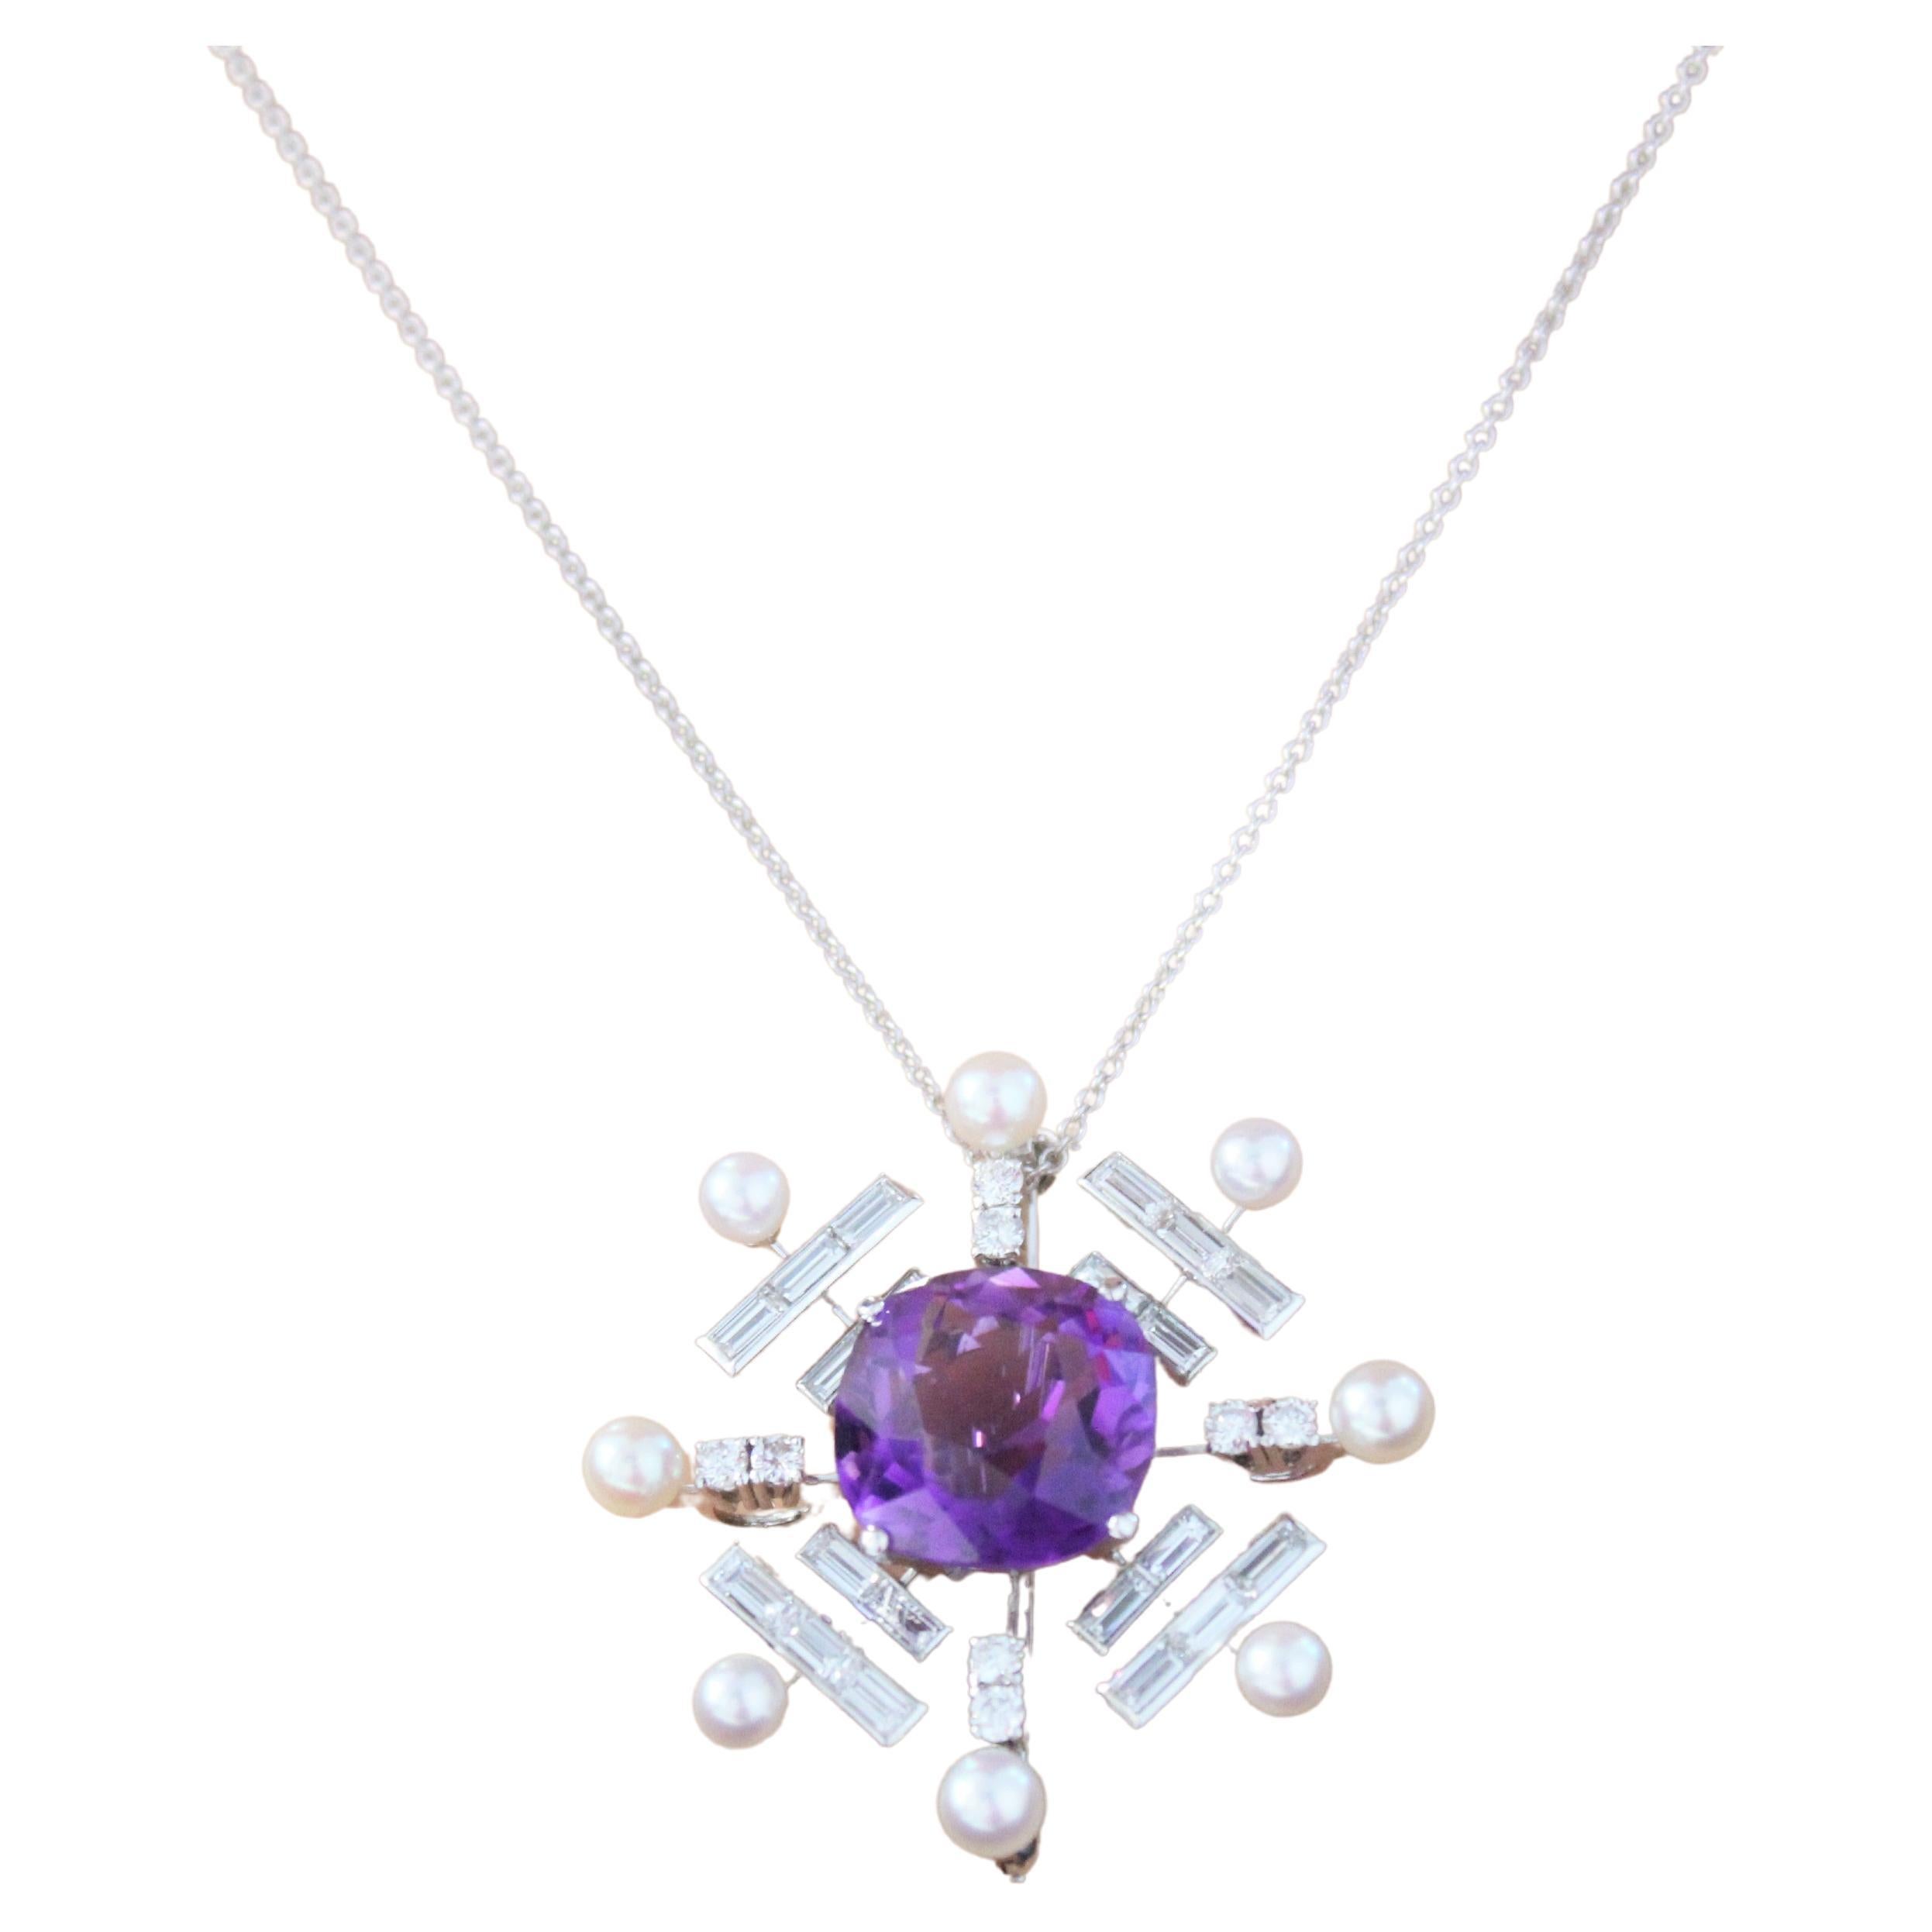 Diamond, Pearl, and Gemstone Pendant in 18K White Gold